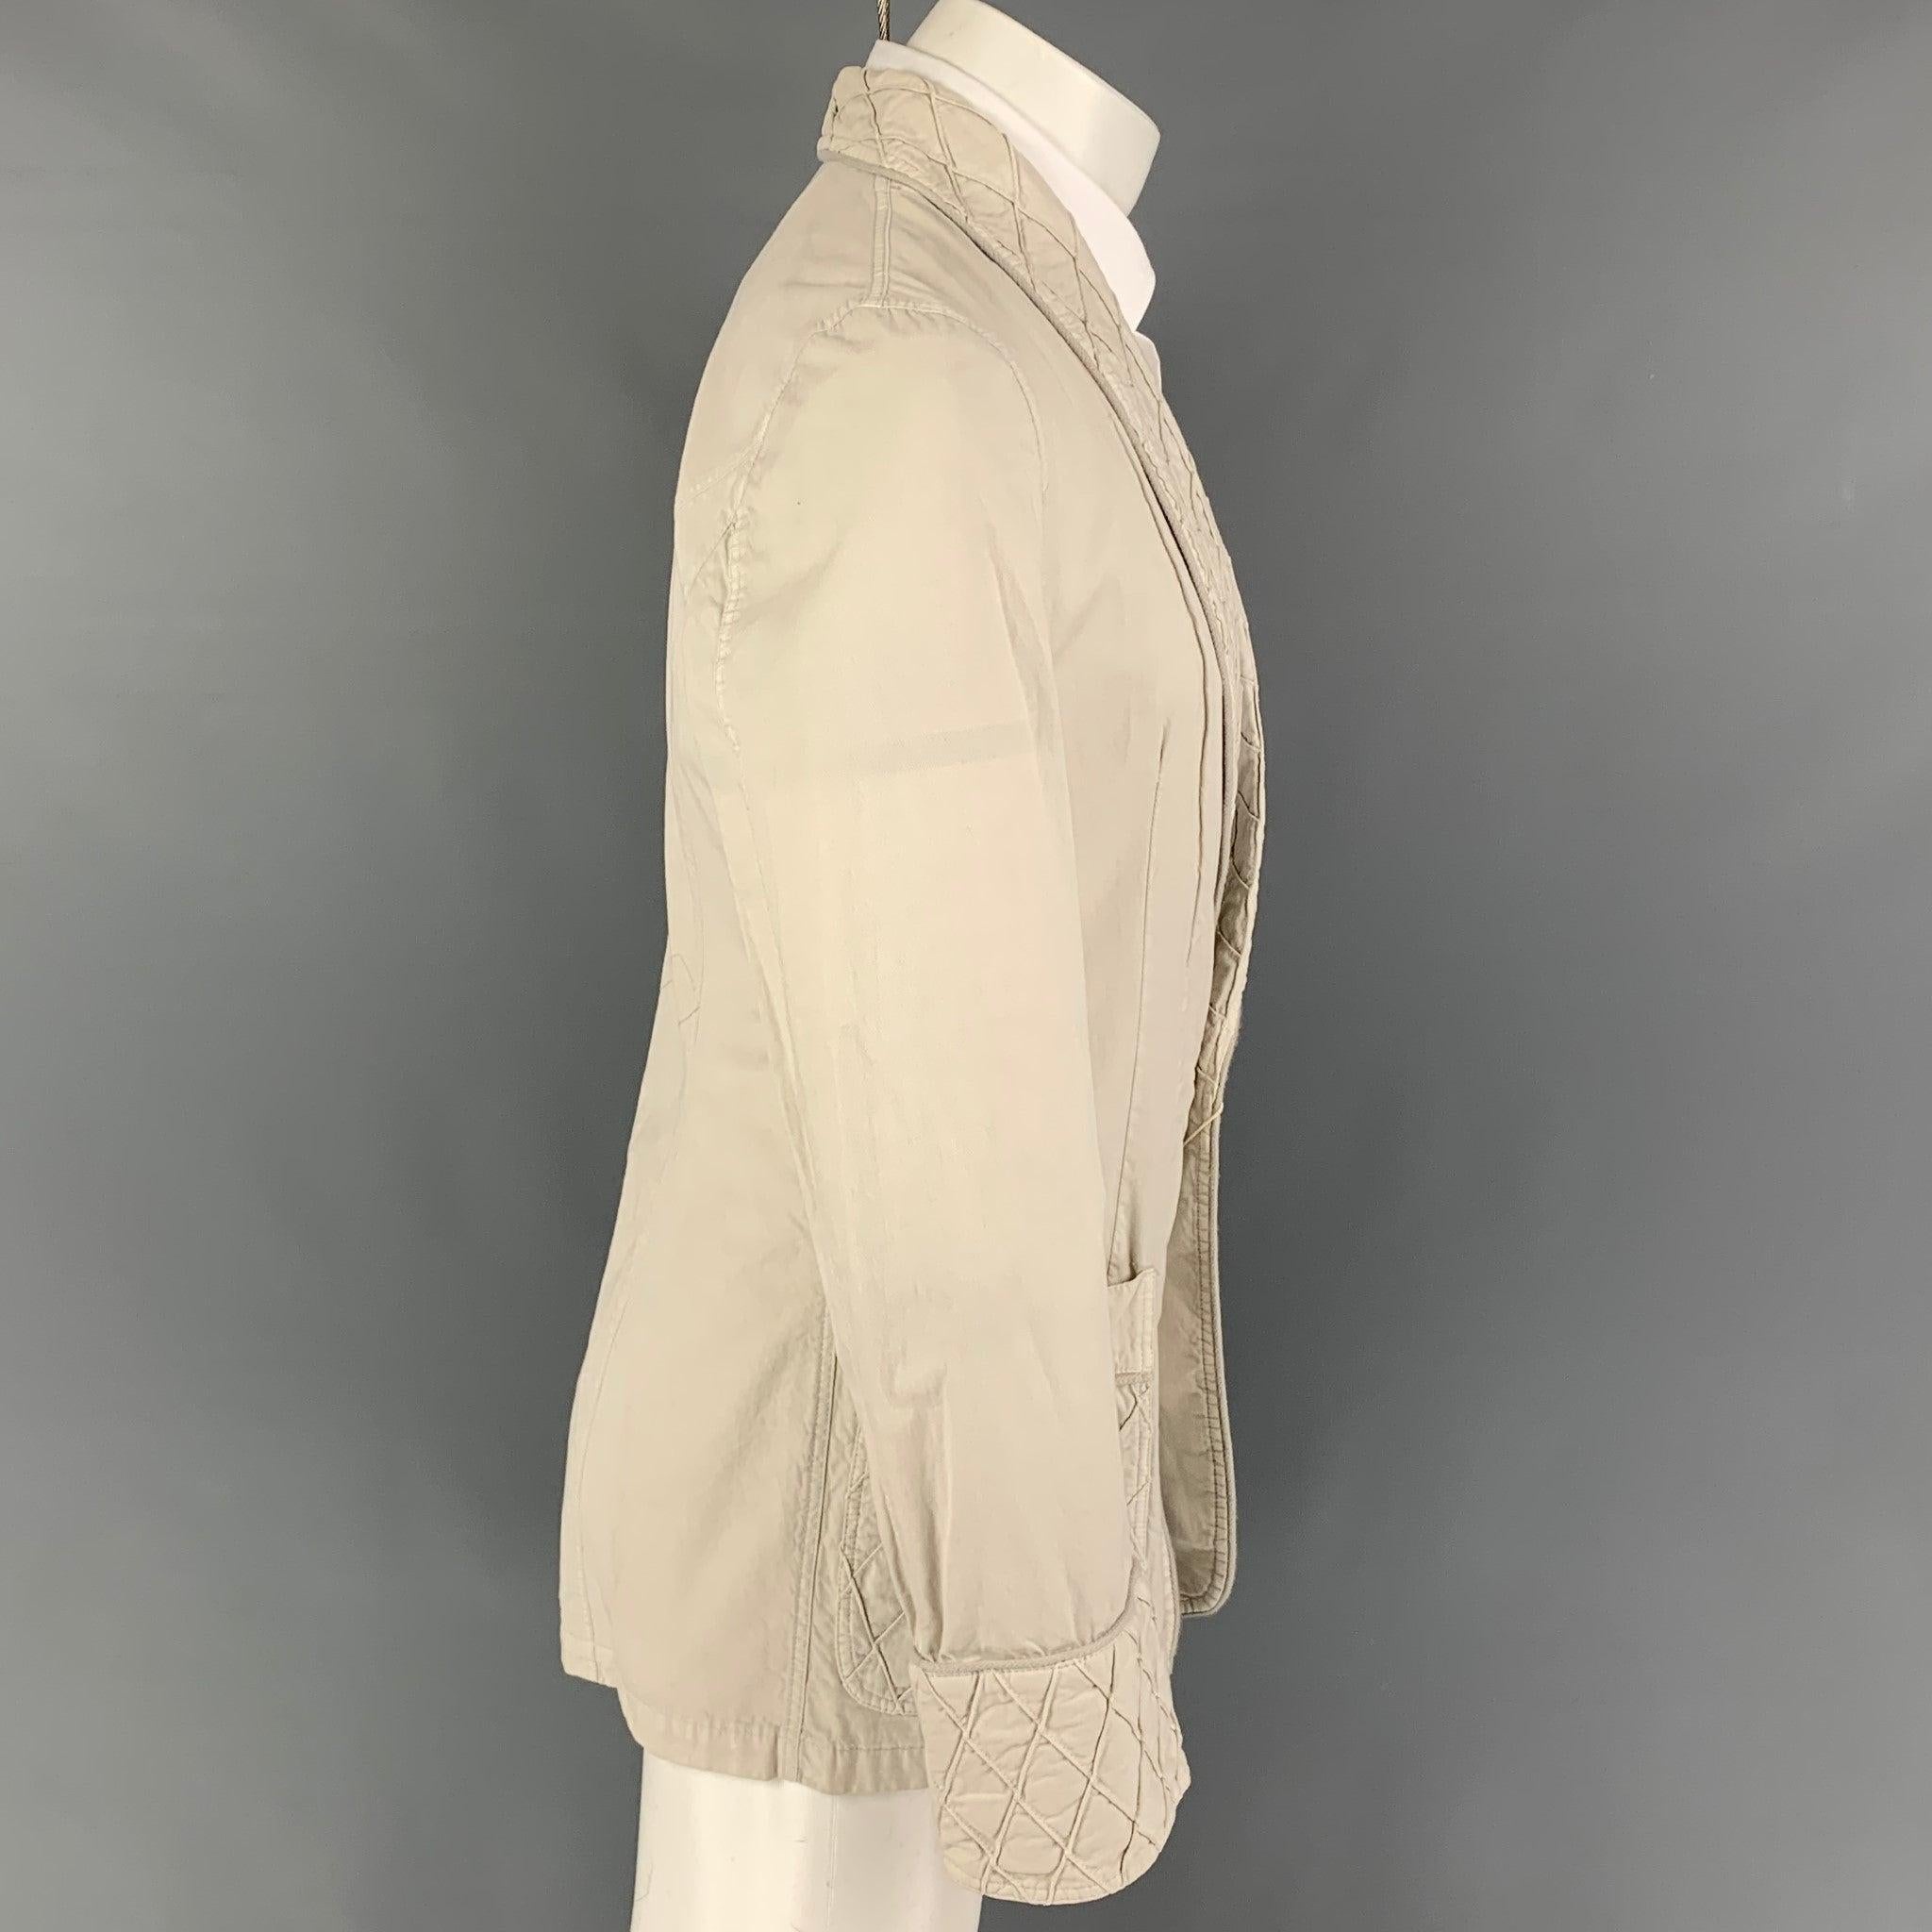 VIKTOR & ROLF jacket comes in a off white cotton featuring a shawl collar, top stitching, patch pockets, and a single button closure.New with tags. 

Marked:   46 

Measurements: 
 
Shoulder: 17.5 inches Chest:
38 inches Sleeve:
26 inches Length: 29